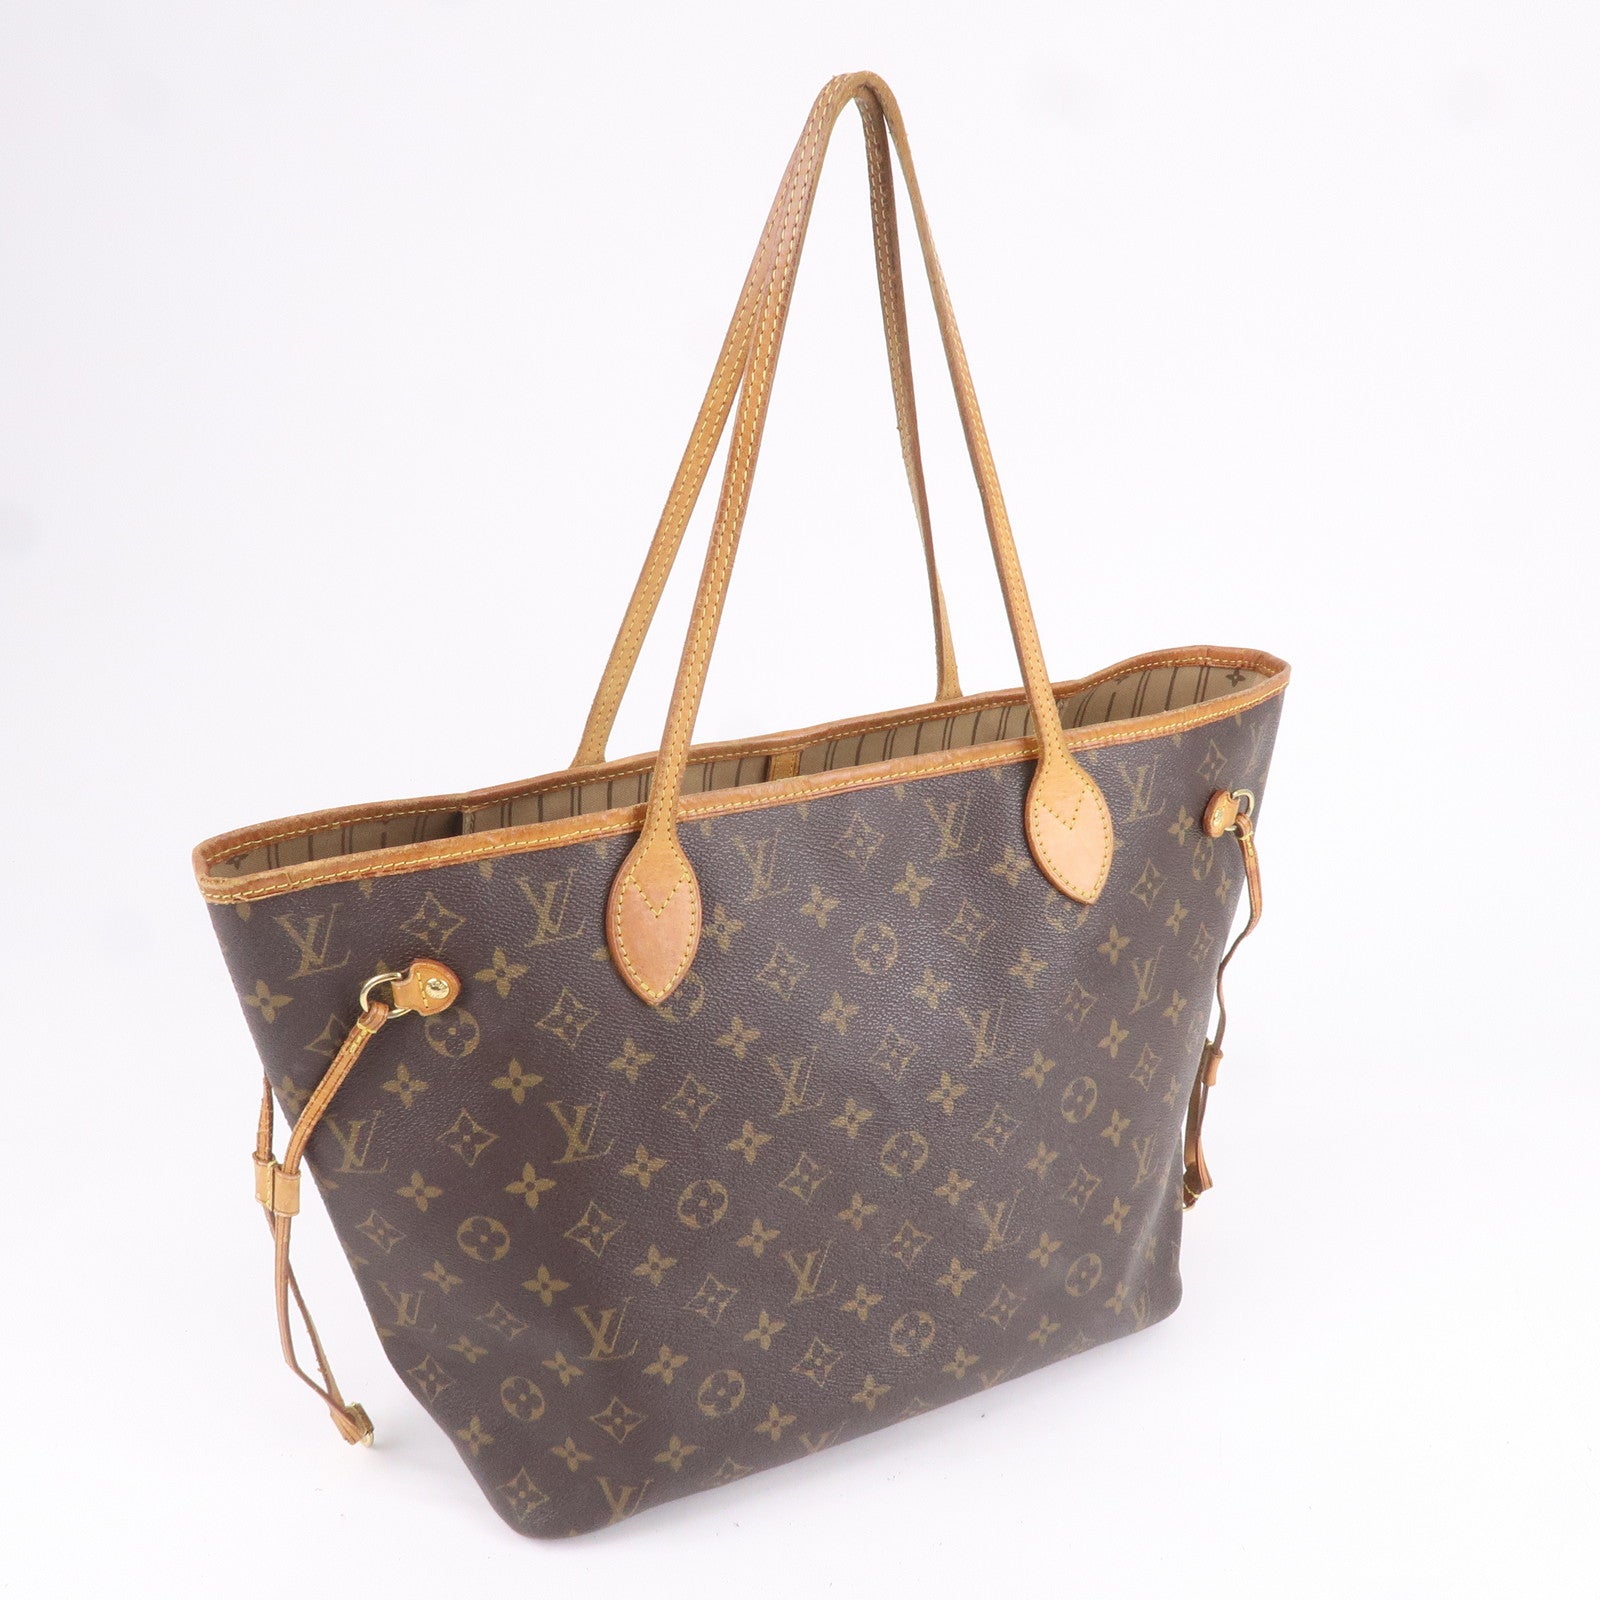 Just bought this, cant wait to use it  Louis vuitton makeup bag, Louis  vuitton handbags, Louis vuitton handbags neverfull